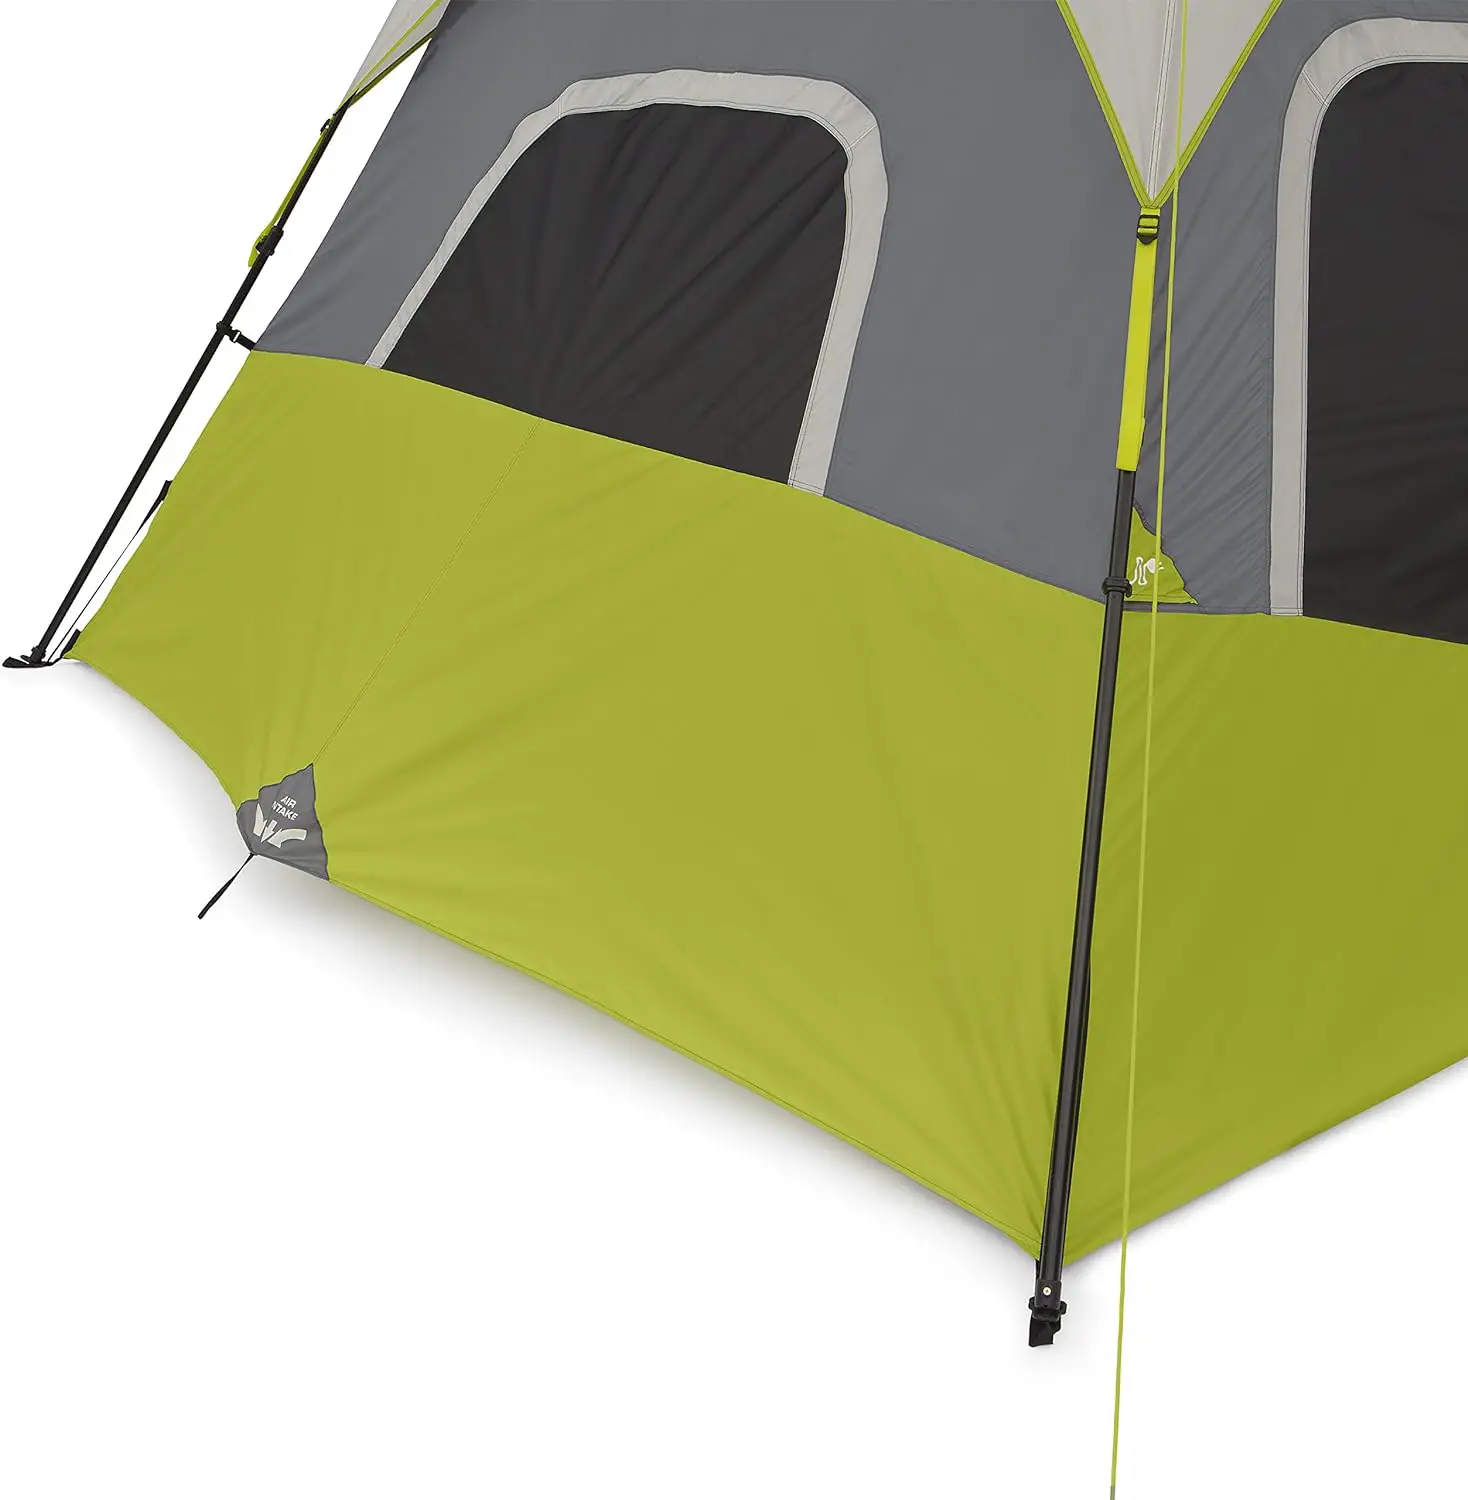 Core 9 Person Instant Cabin Tent - 14' x 9' Green (40008) Review